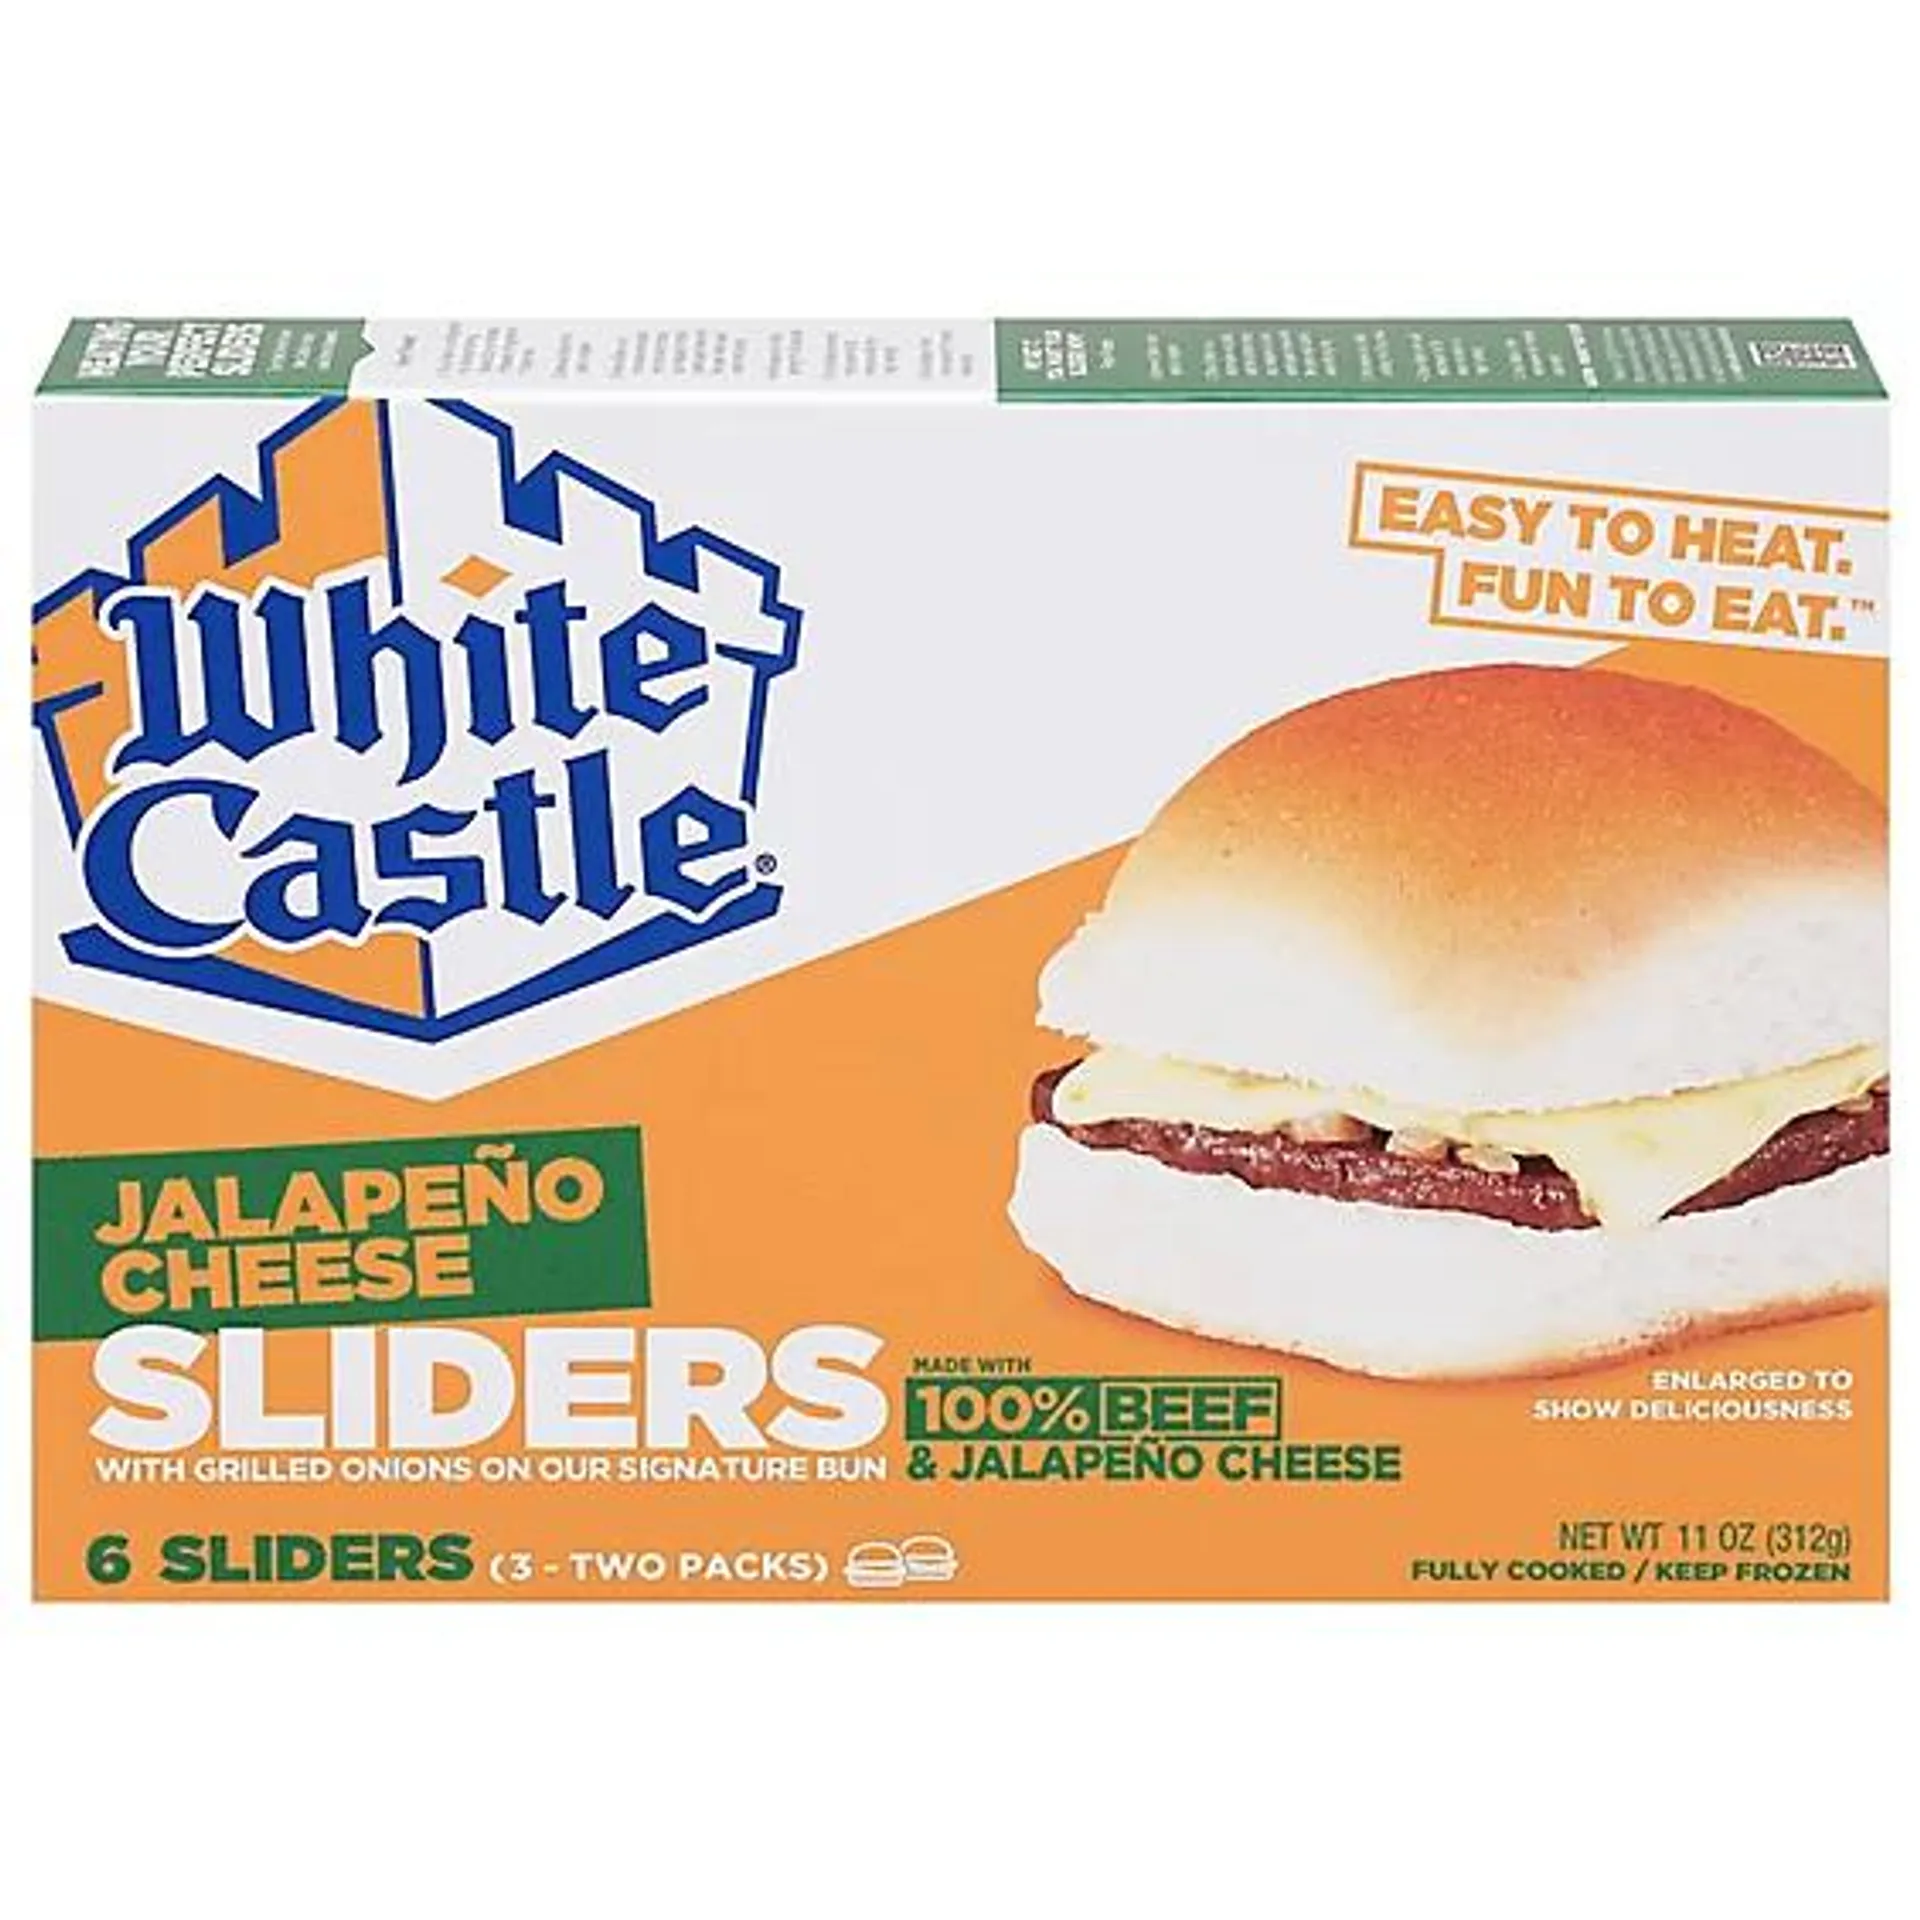 White Castle Microwaveable Cheeseburgers Jalapeno - 6 Count